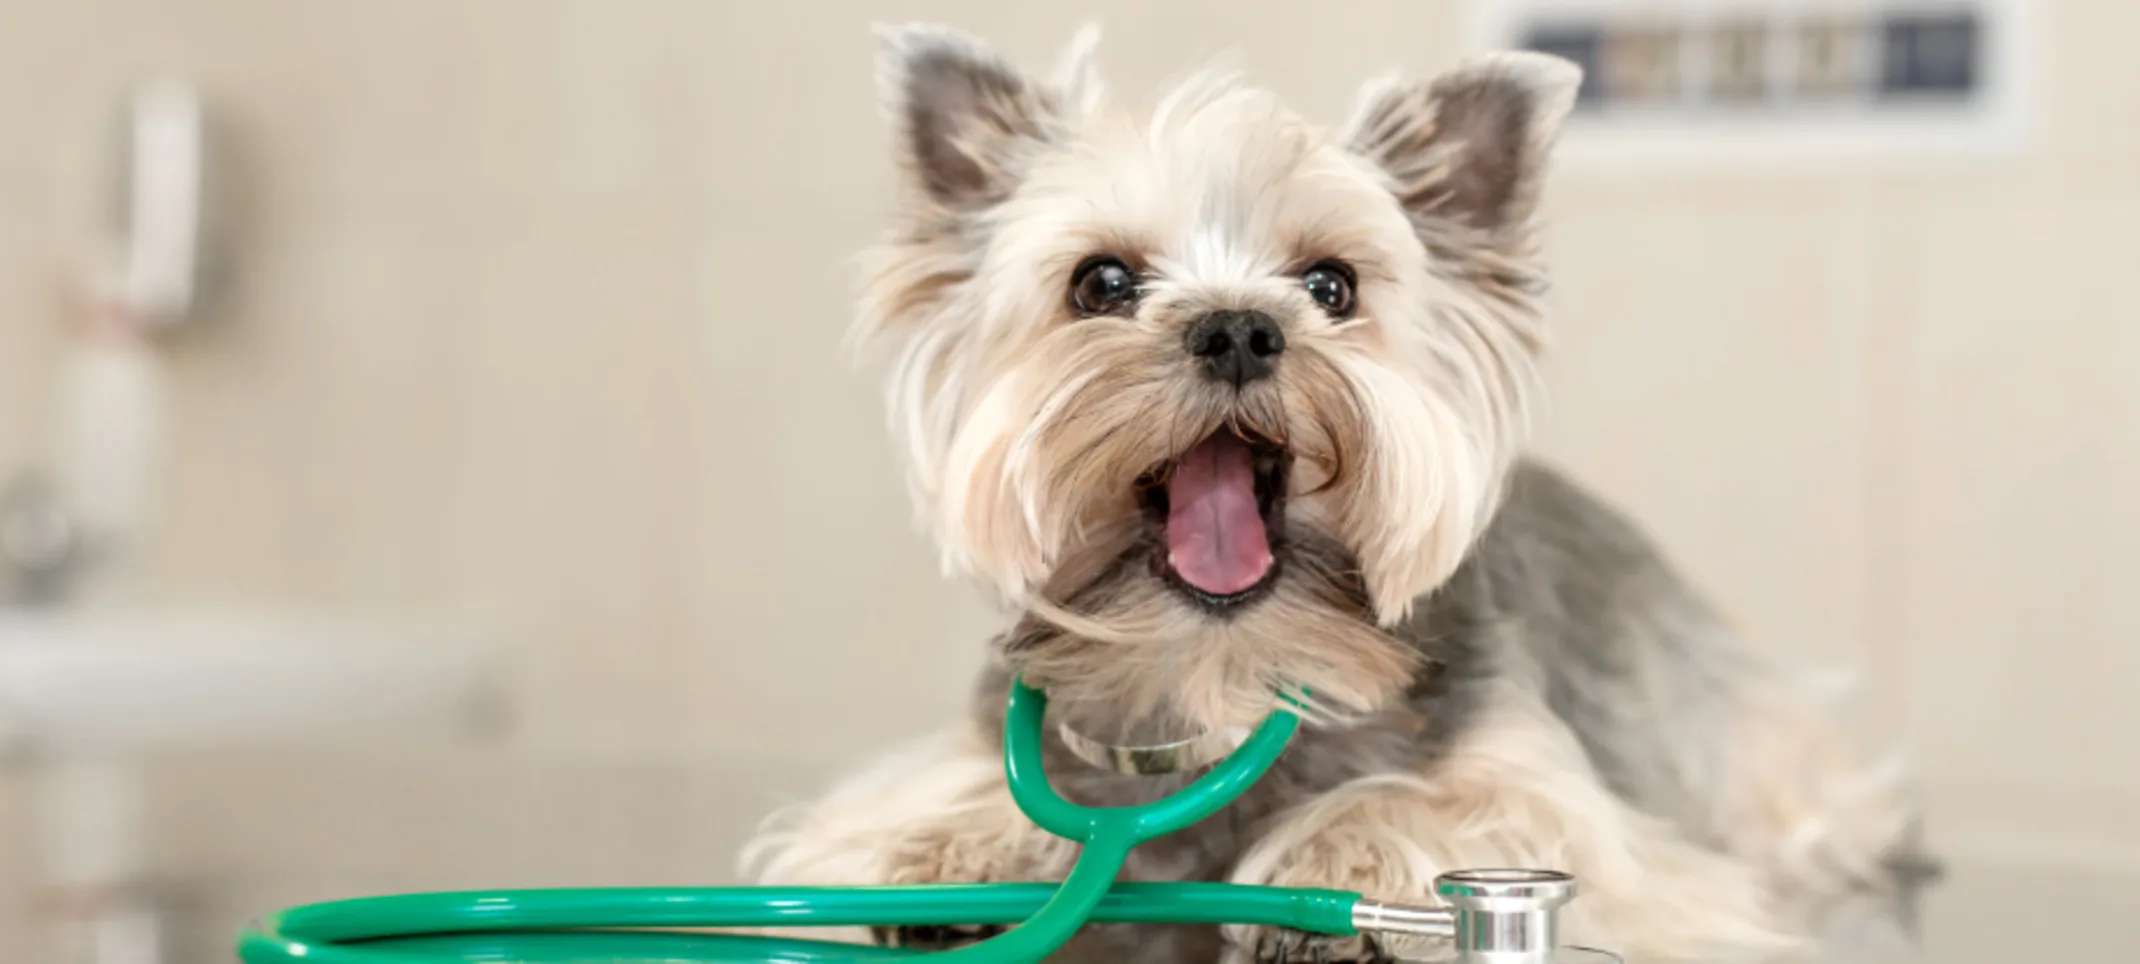 Small Dog Wearing a Green Stethoscope